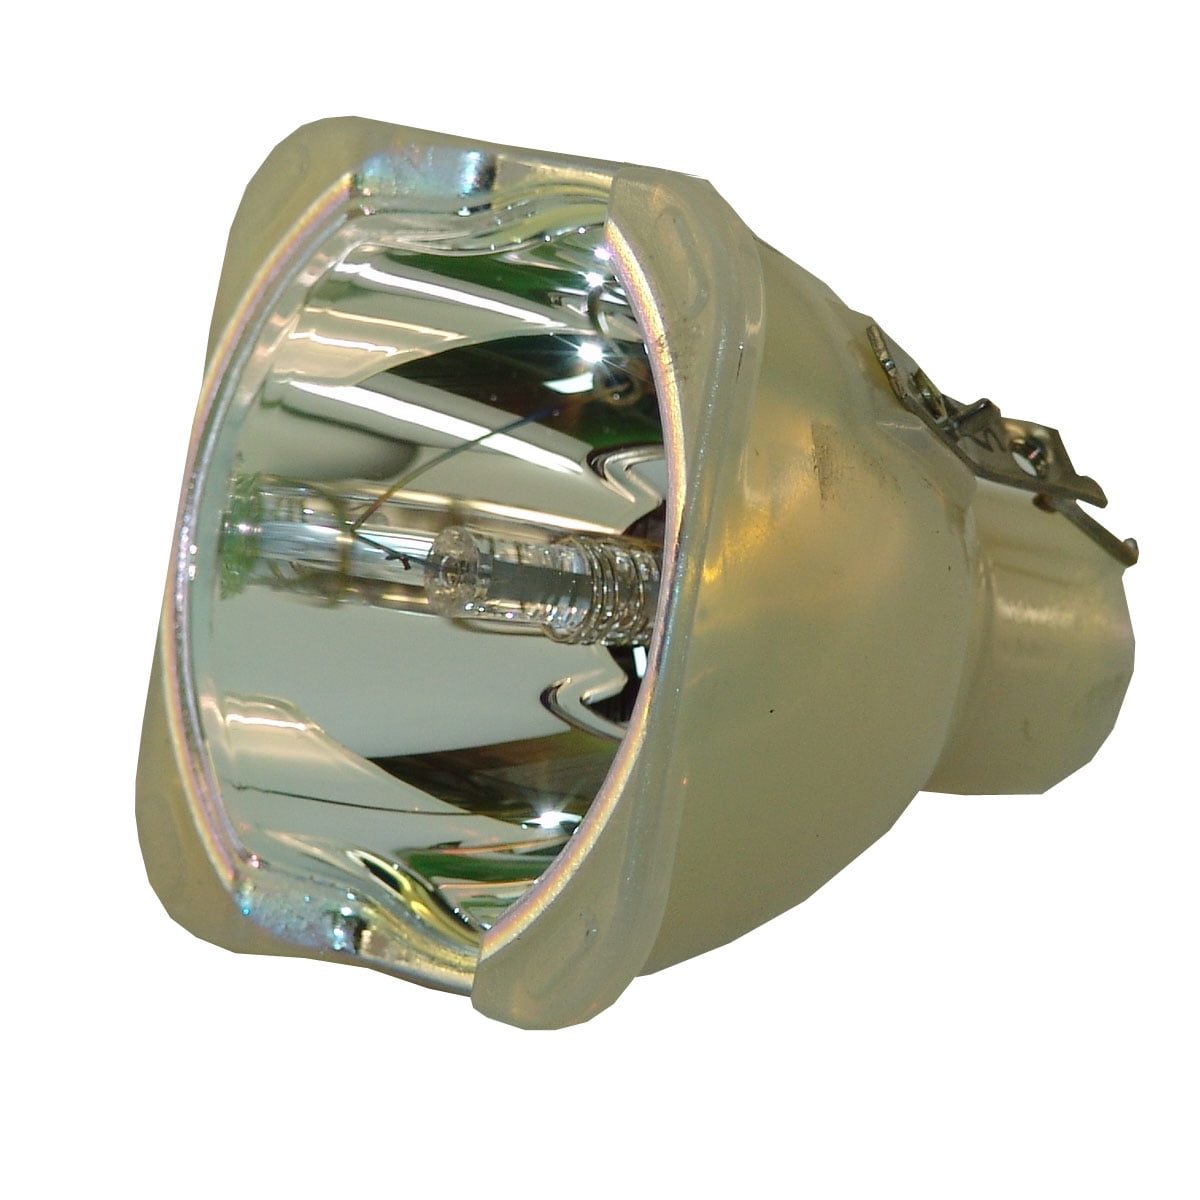 Replacement for Triumph-Adler V30 Lamp & Housing Projector Tv Lamp Bulb by Technical Precision 